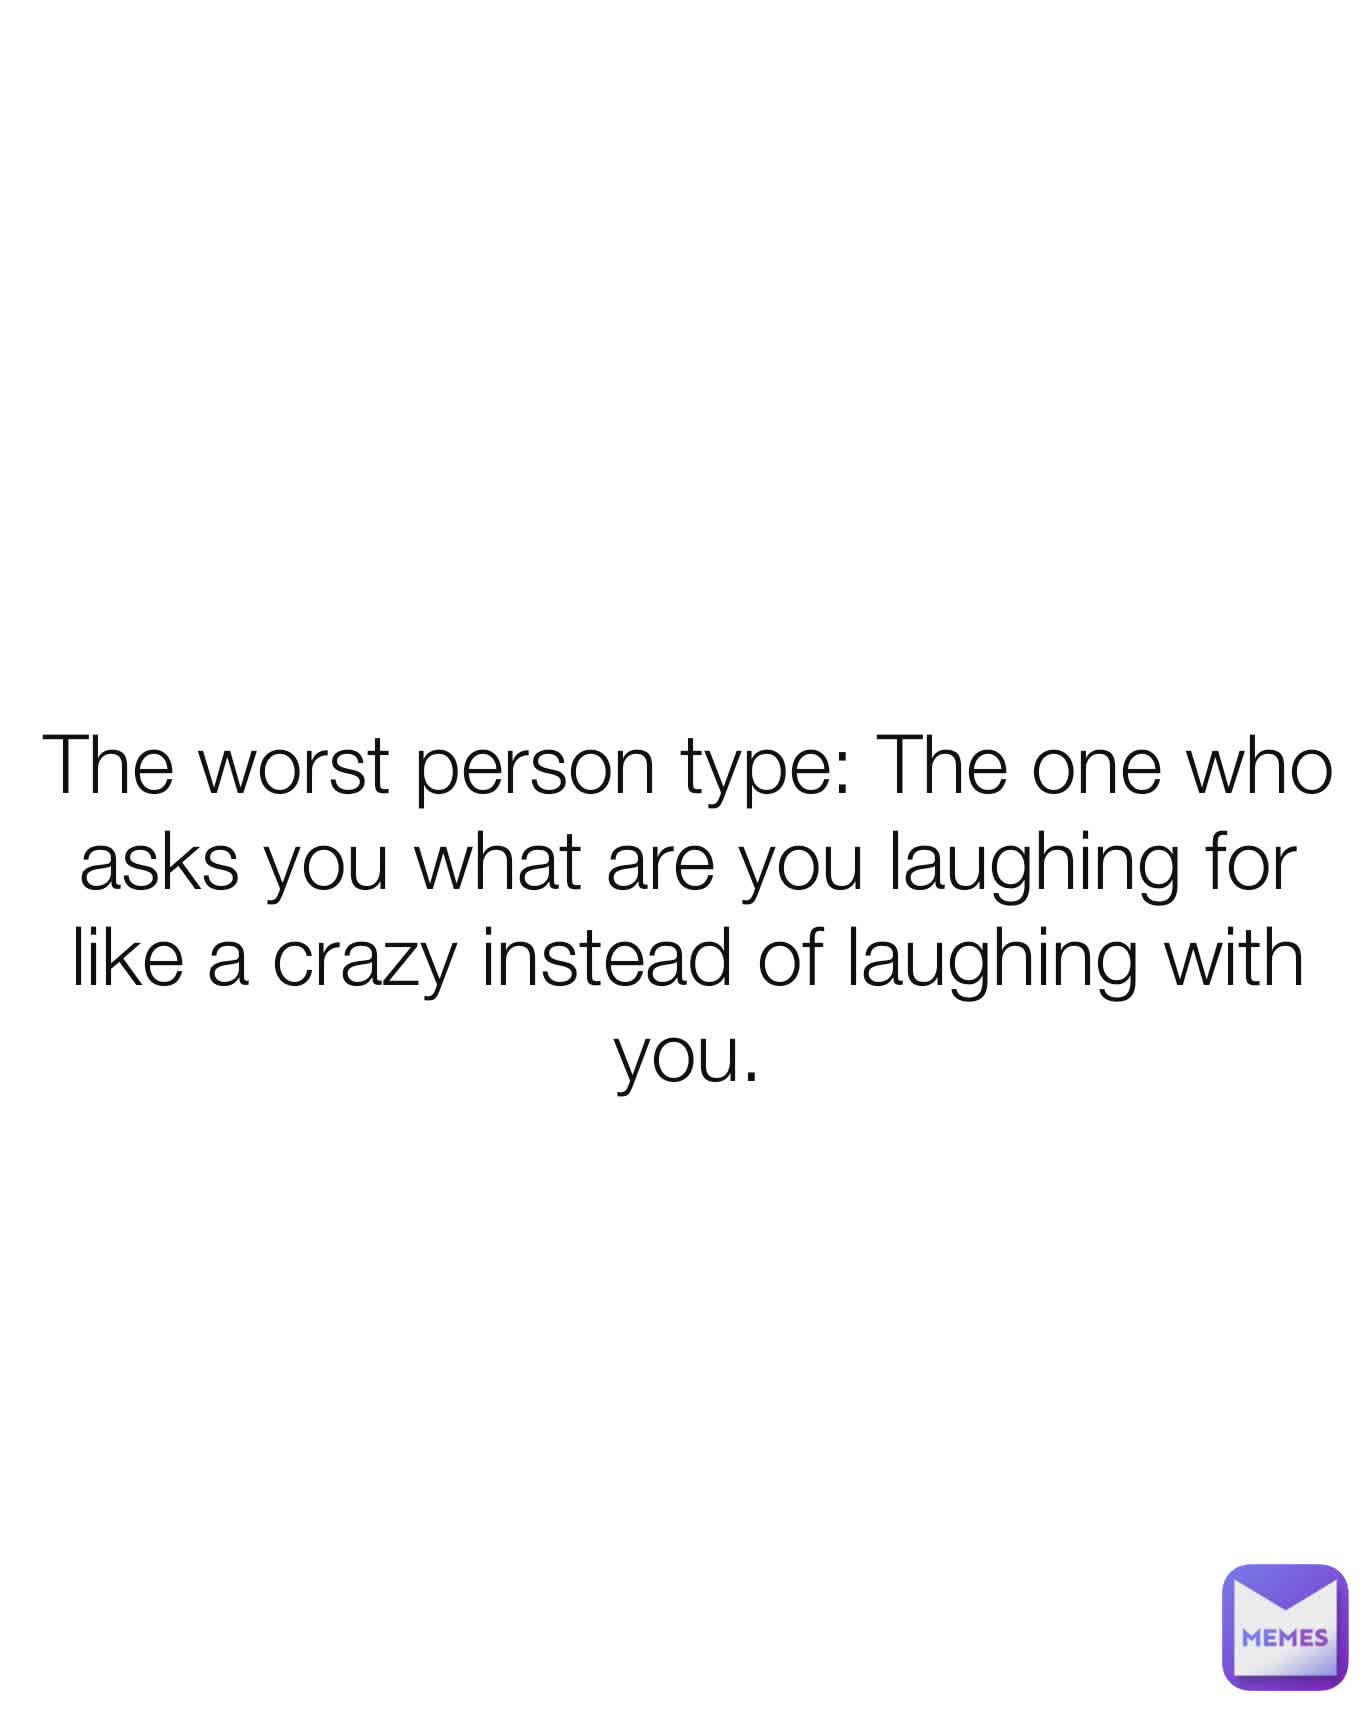 The worst person type: The one who asks you what are you laughing for like a crazy instead of laughing with you.